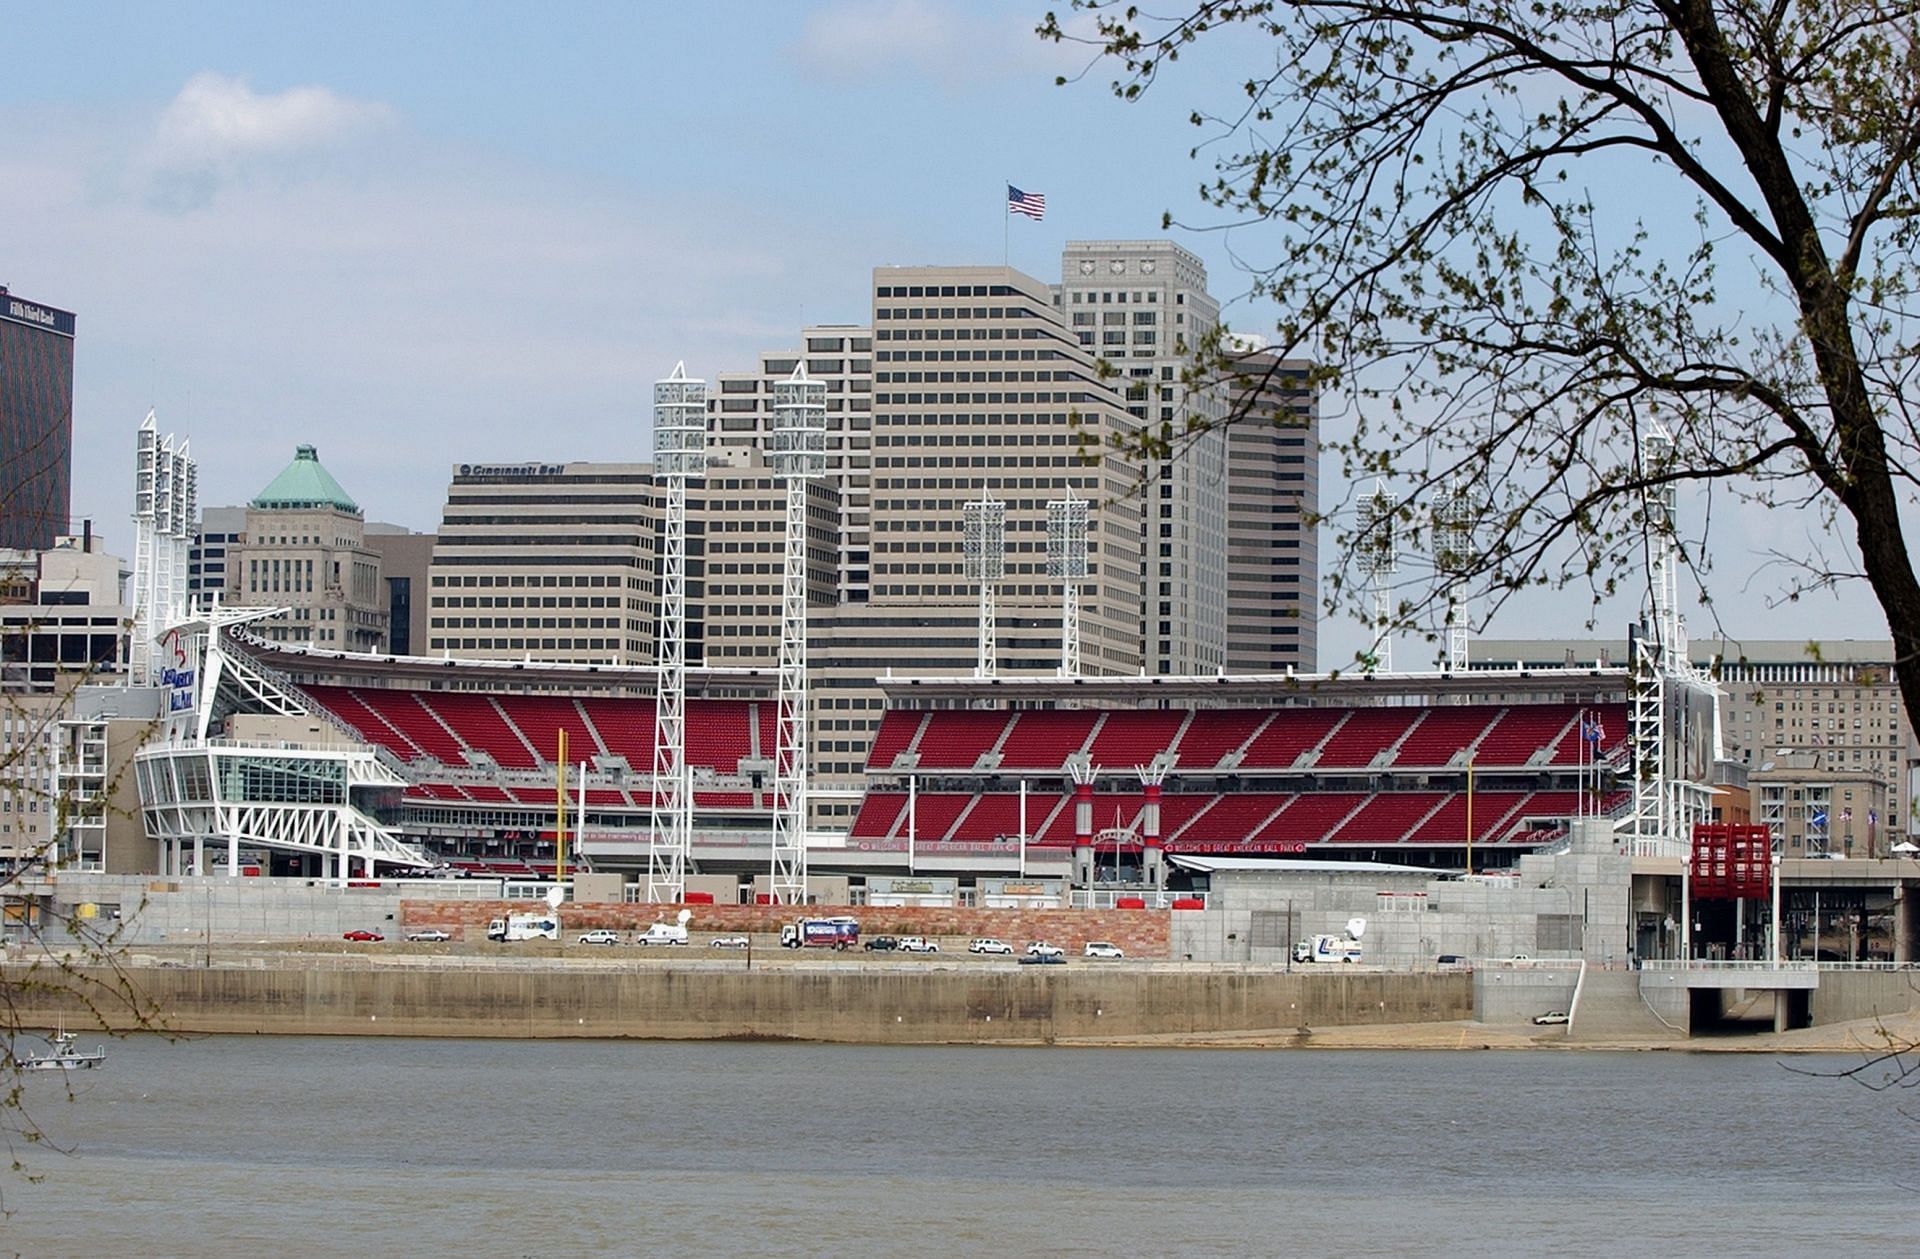 The Beautiful Great American Ball Park sits just off the Ohio River in Cincinnati.